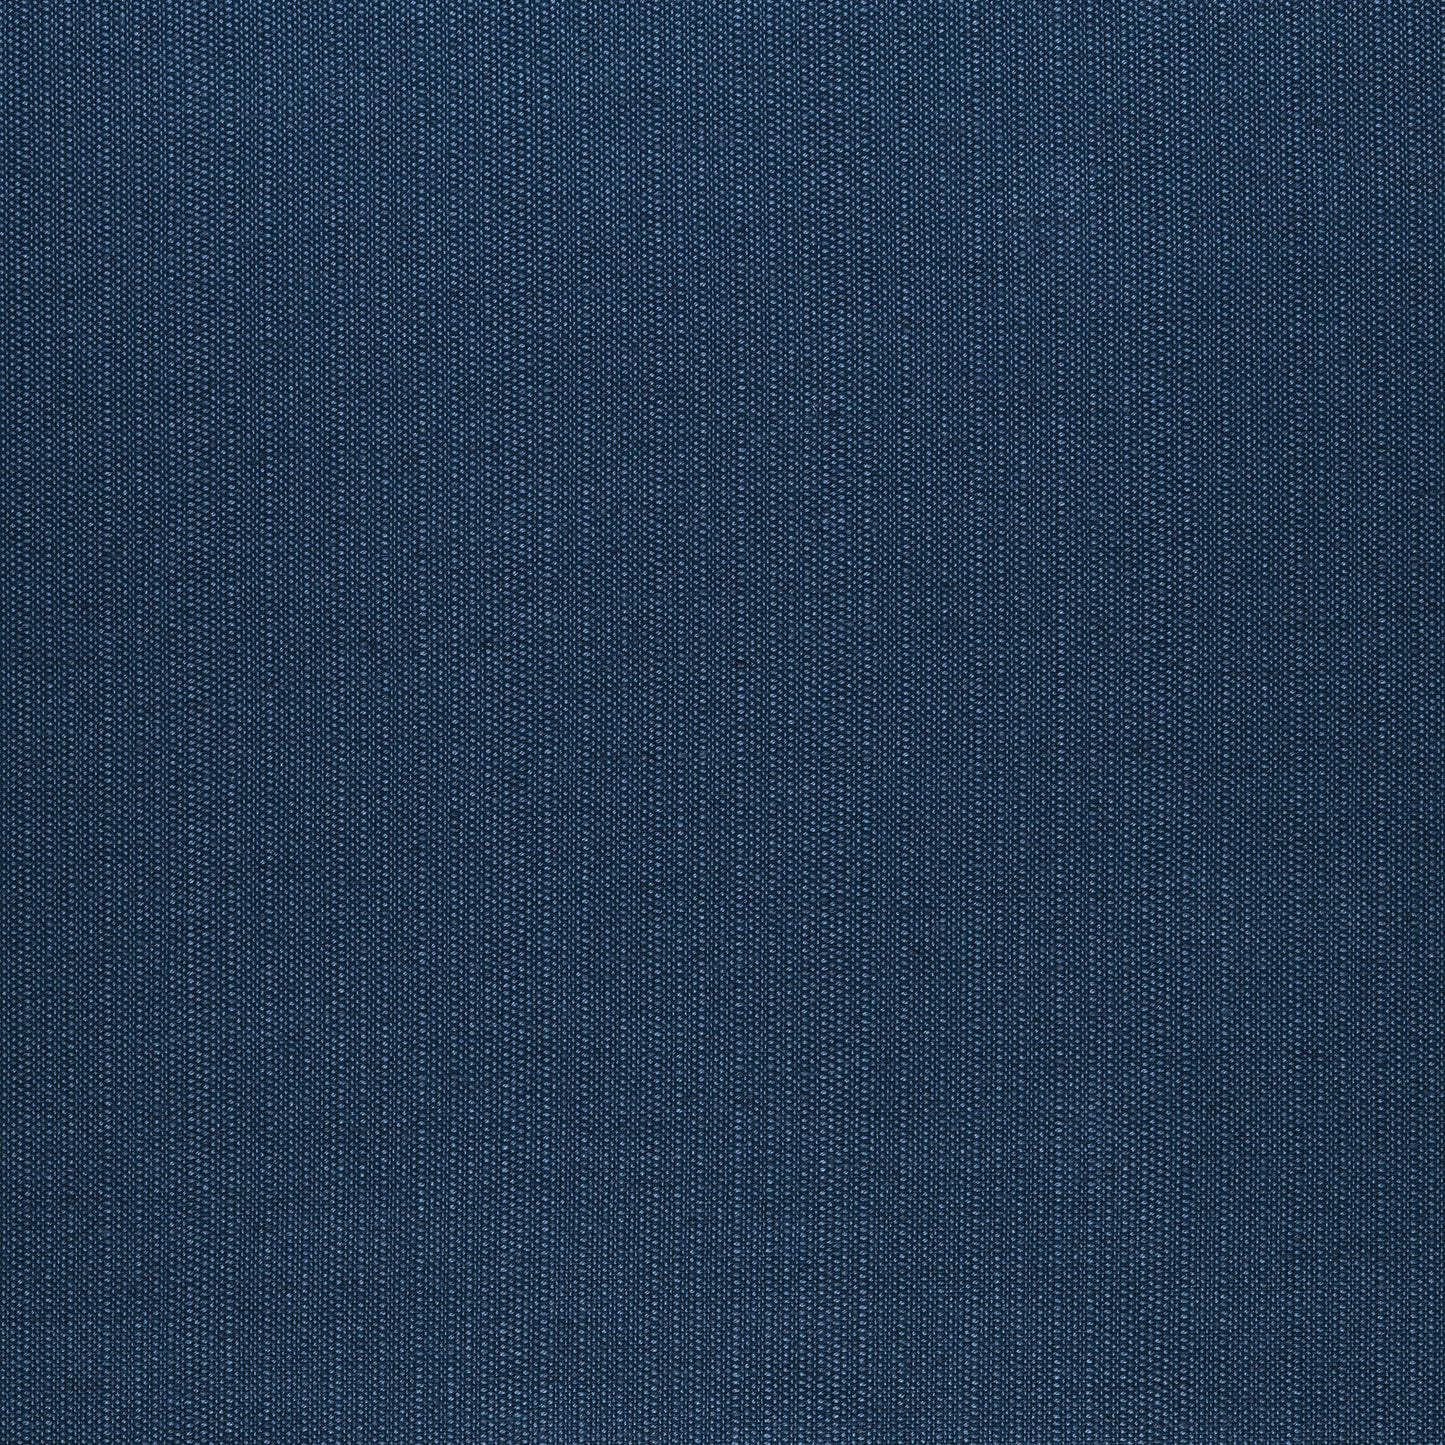 Purchase Thibaut Fabric Item W73370 pattern name Brooks color Navy